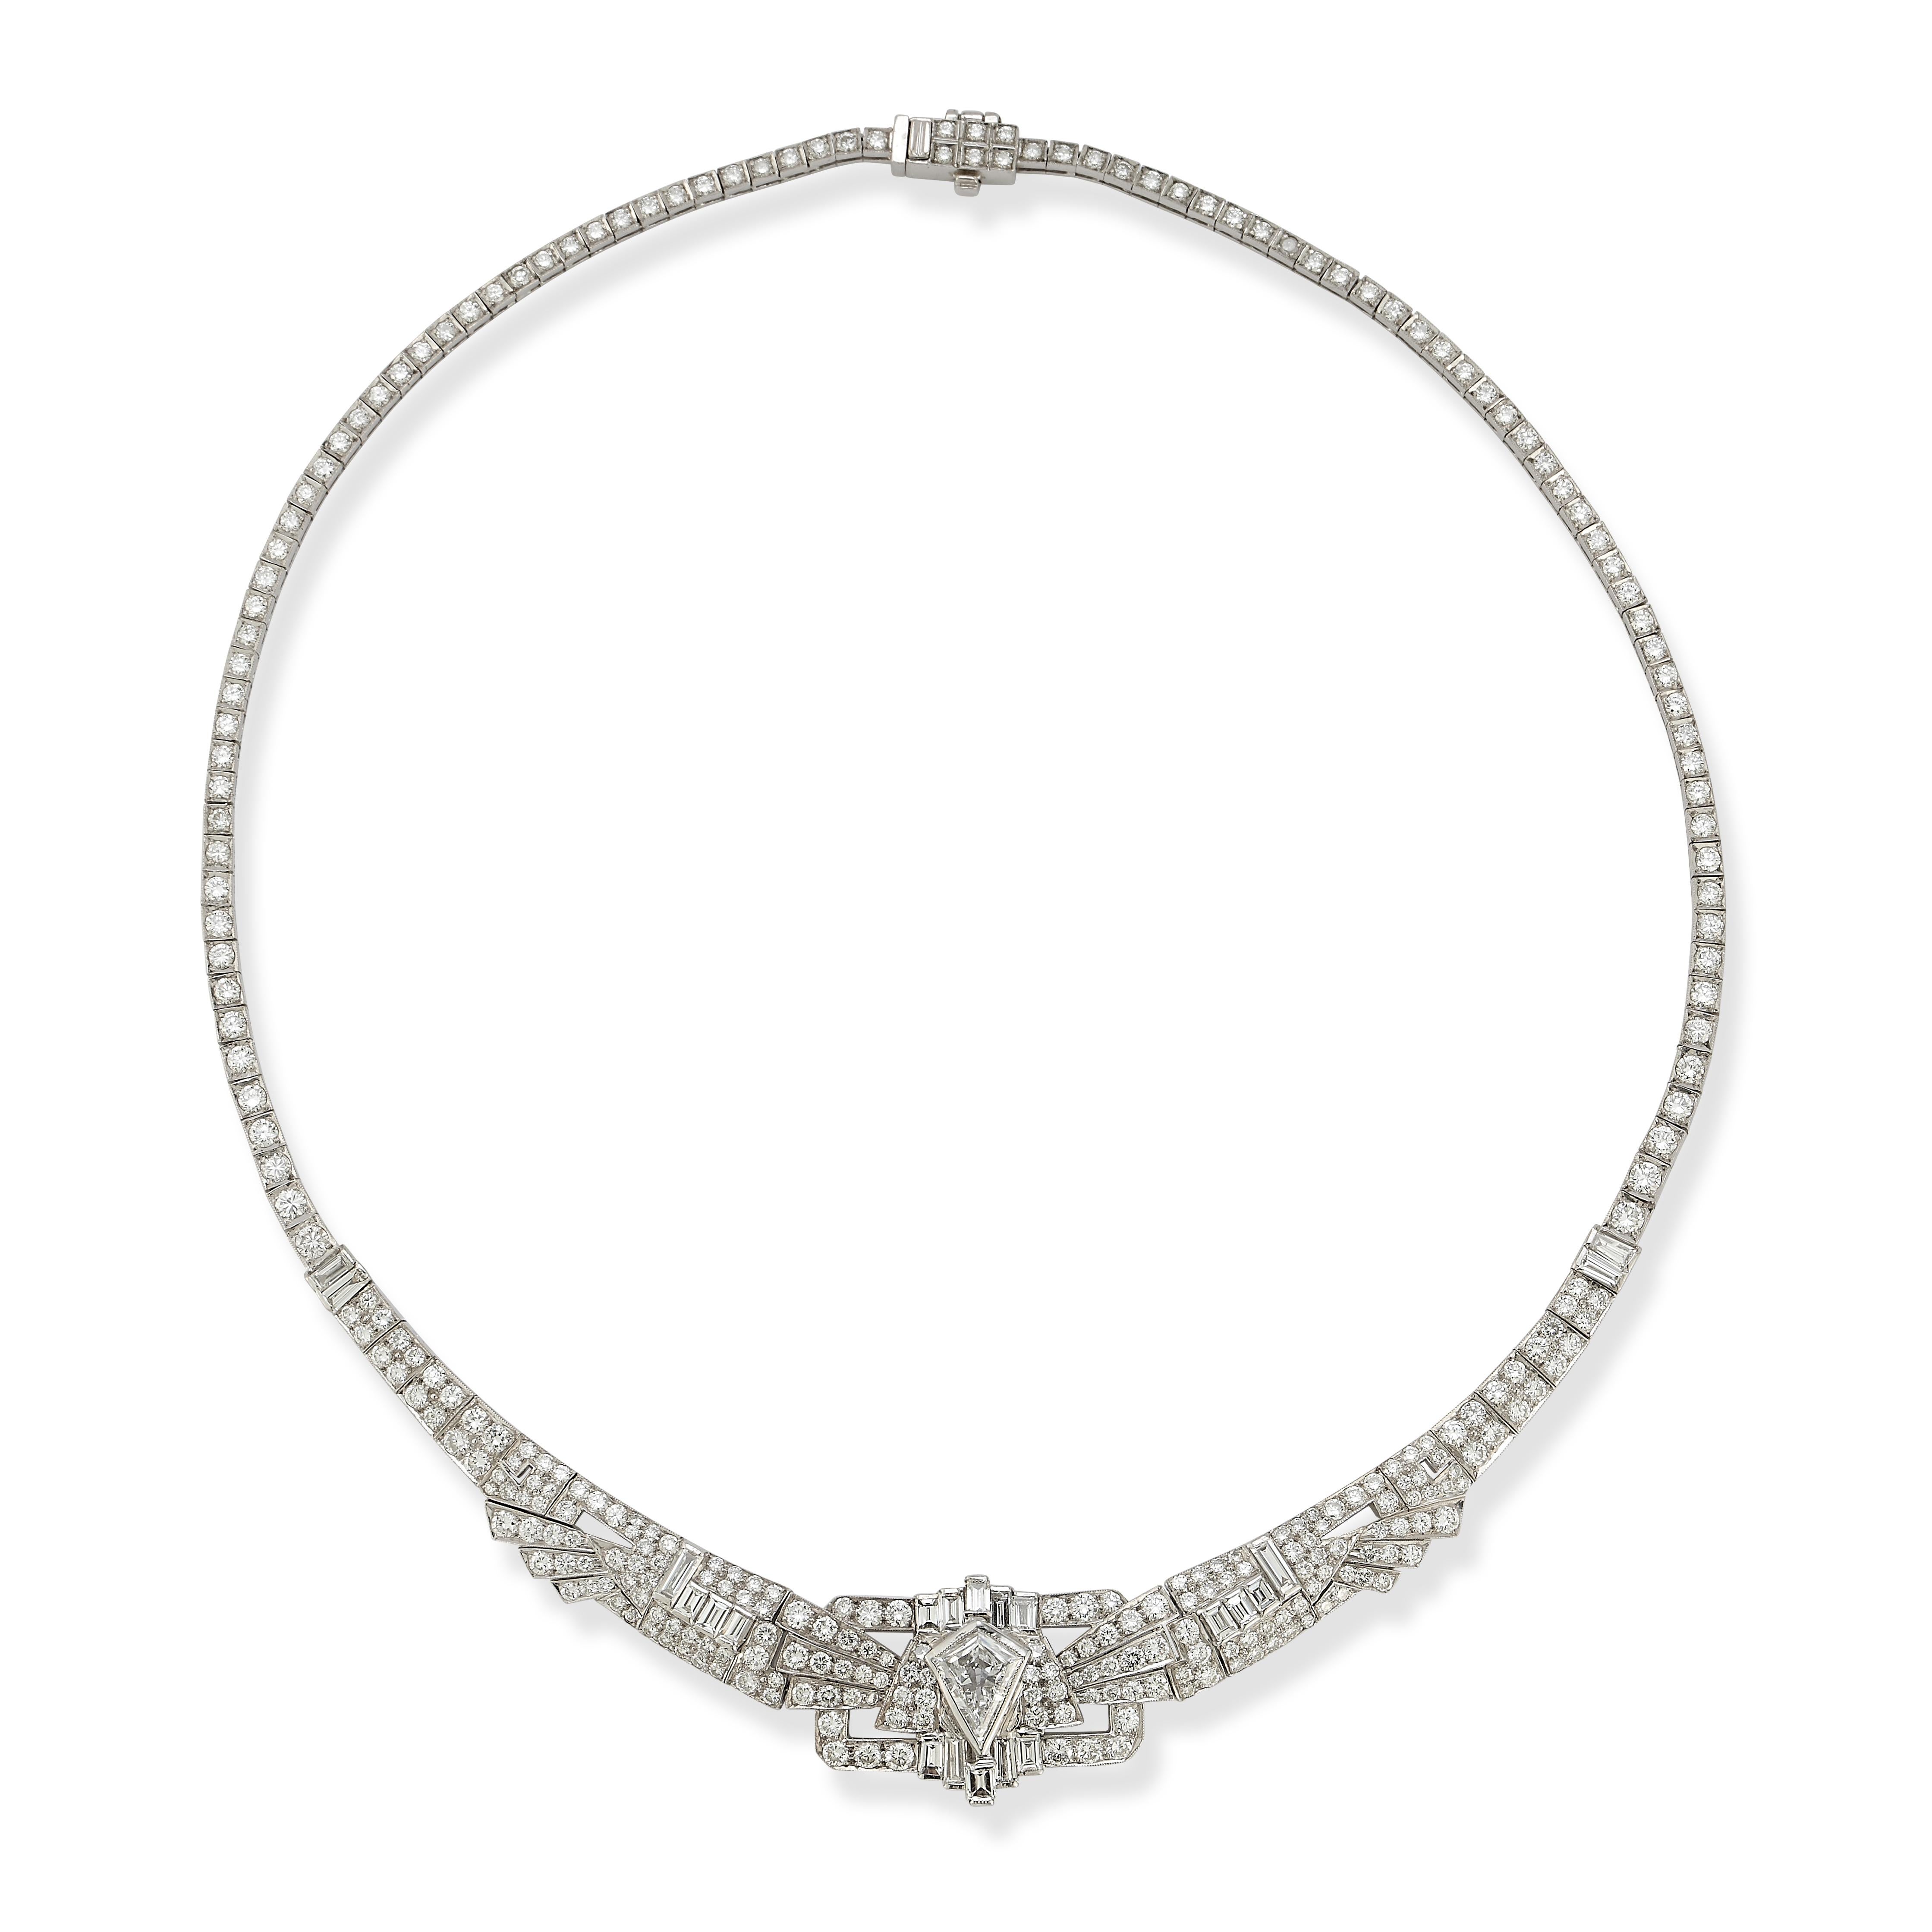 Mixed Cut Diamond Necklace

An 18-karat white gold necklace set with 308 round cut diamonds, 22 baguette cut diamonds, and 1 approximately 1.60 carat kite shaped diamond

Total Approximate Diamond Weight: 10.36 carats

Length: 15